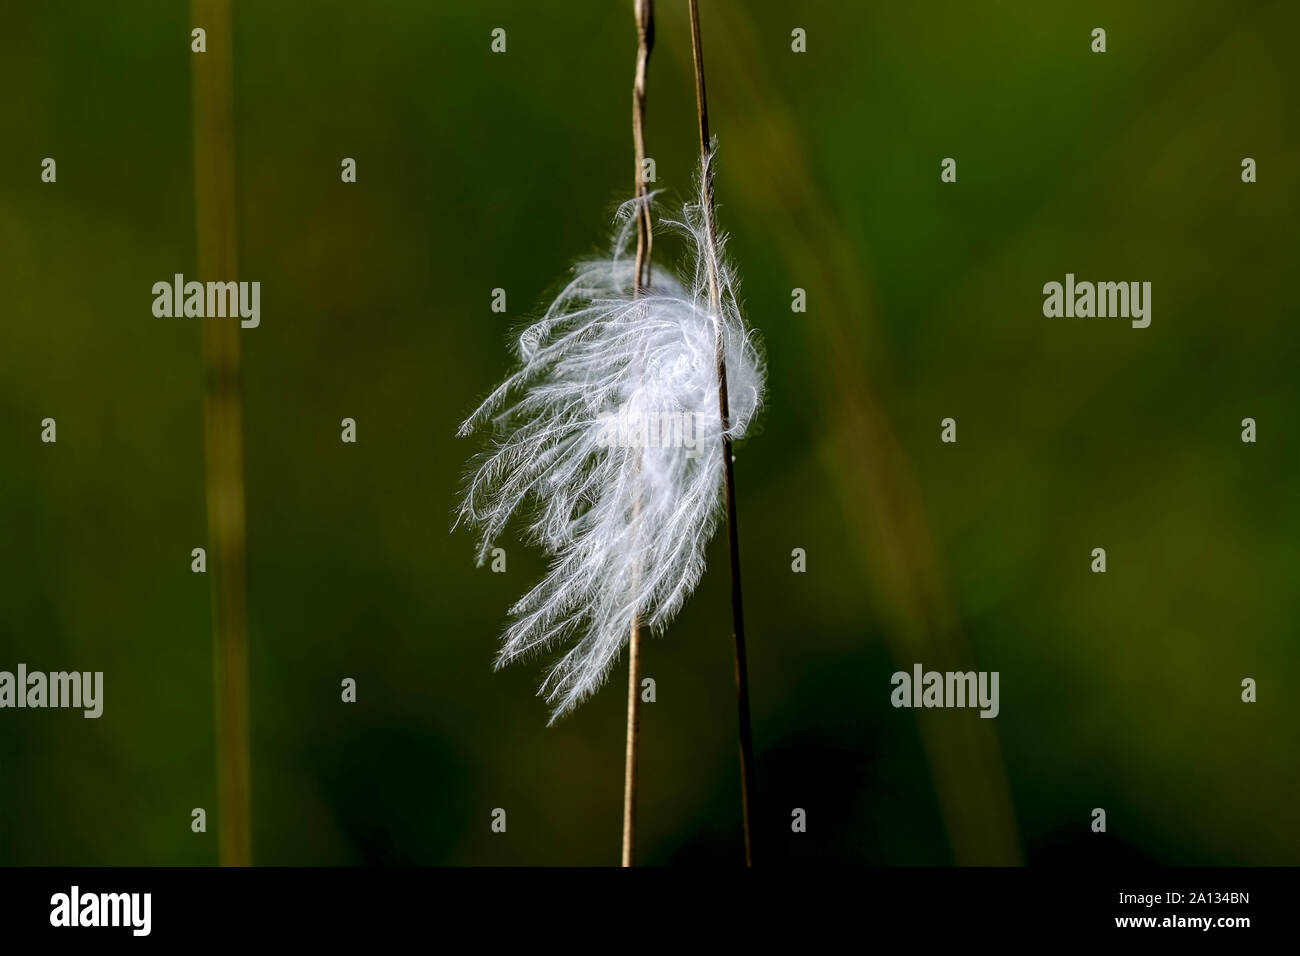 fluffy feather down stuck on agrass Stock Photo